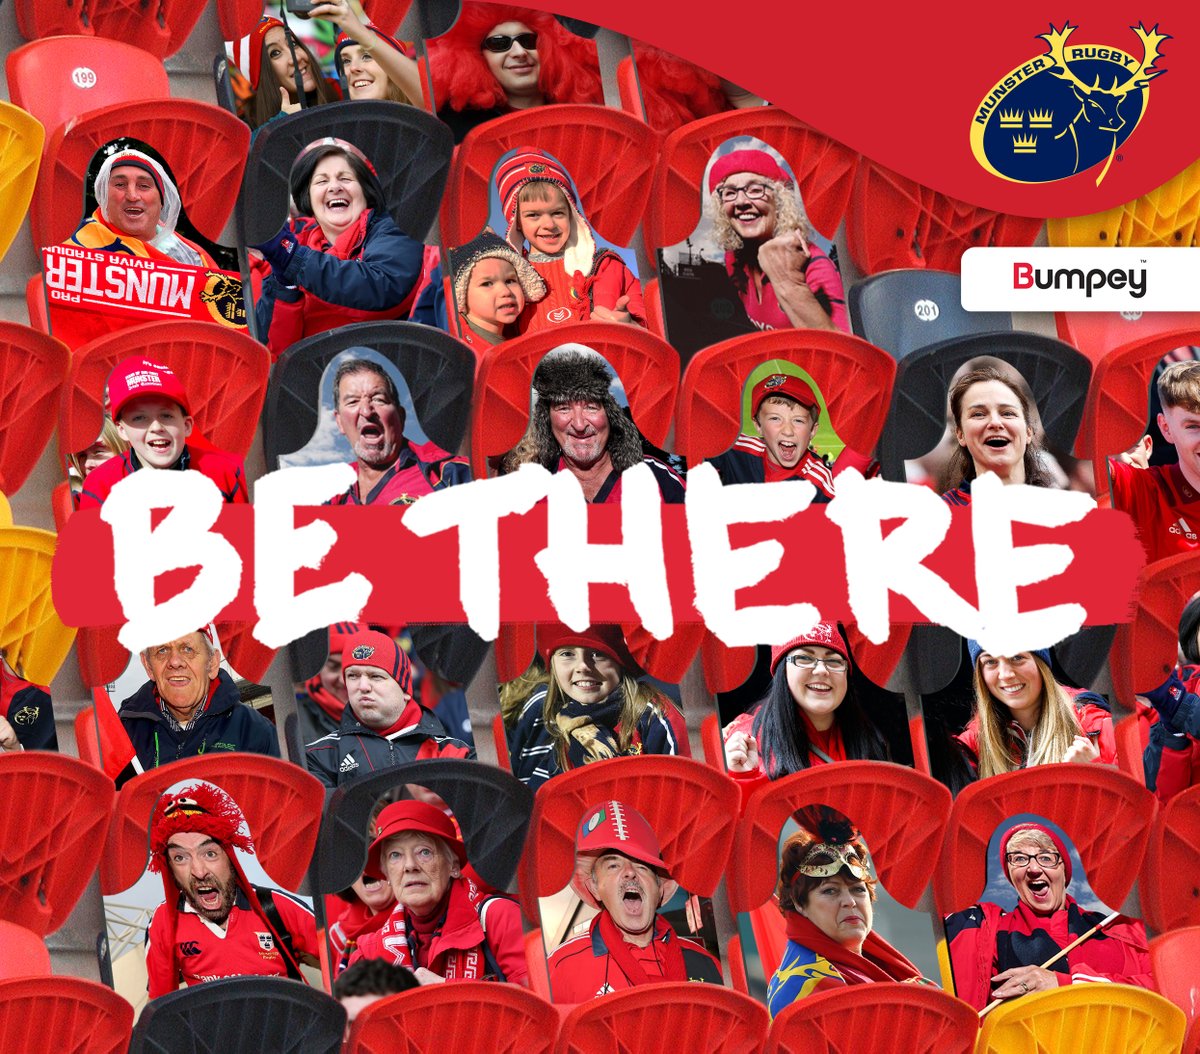 Munster Rugby are offering supporters the chance to have a cardboard cut-out of themselves in Thomond Park for the opening game of the Guinness PRO14 season. The cut-outs will remain in place while the stadium capacity is limited. BE THERE & SUPPORT lnkd.in/e7PhnuG